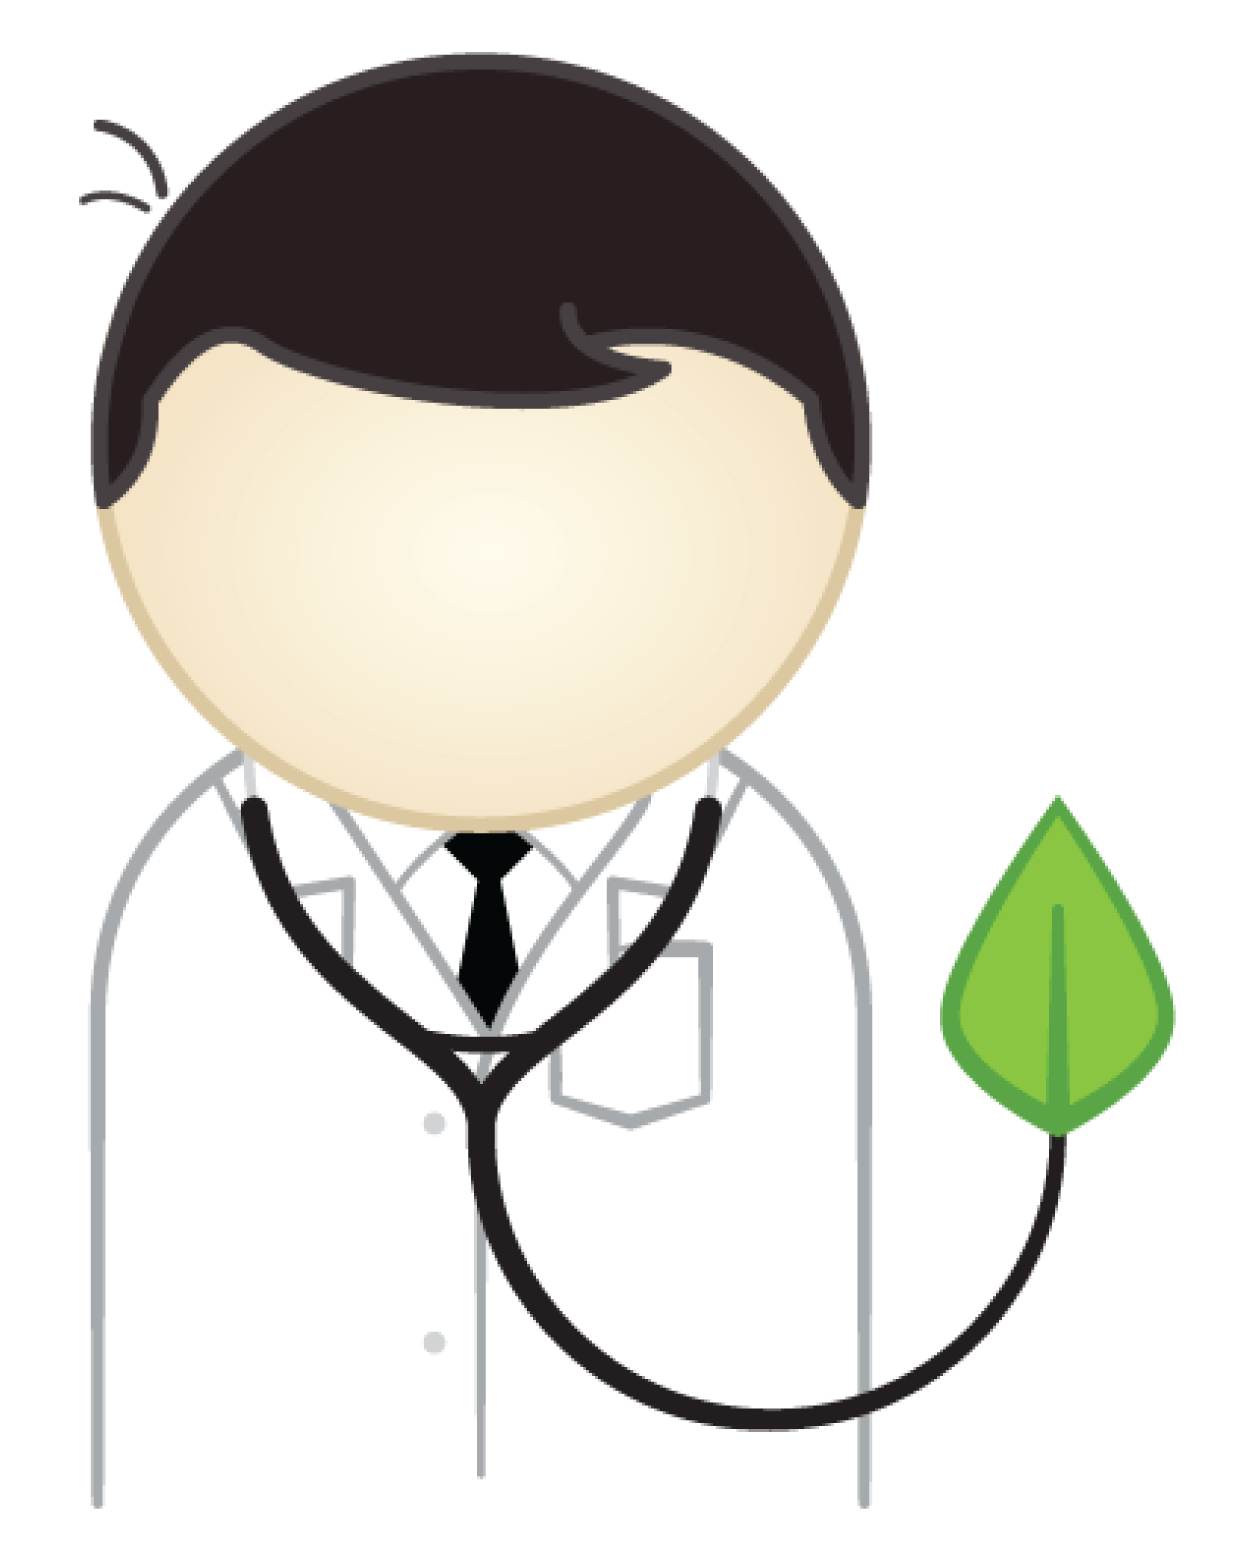 Disease clipart doctor. Naturopathic ny medicine for